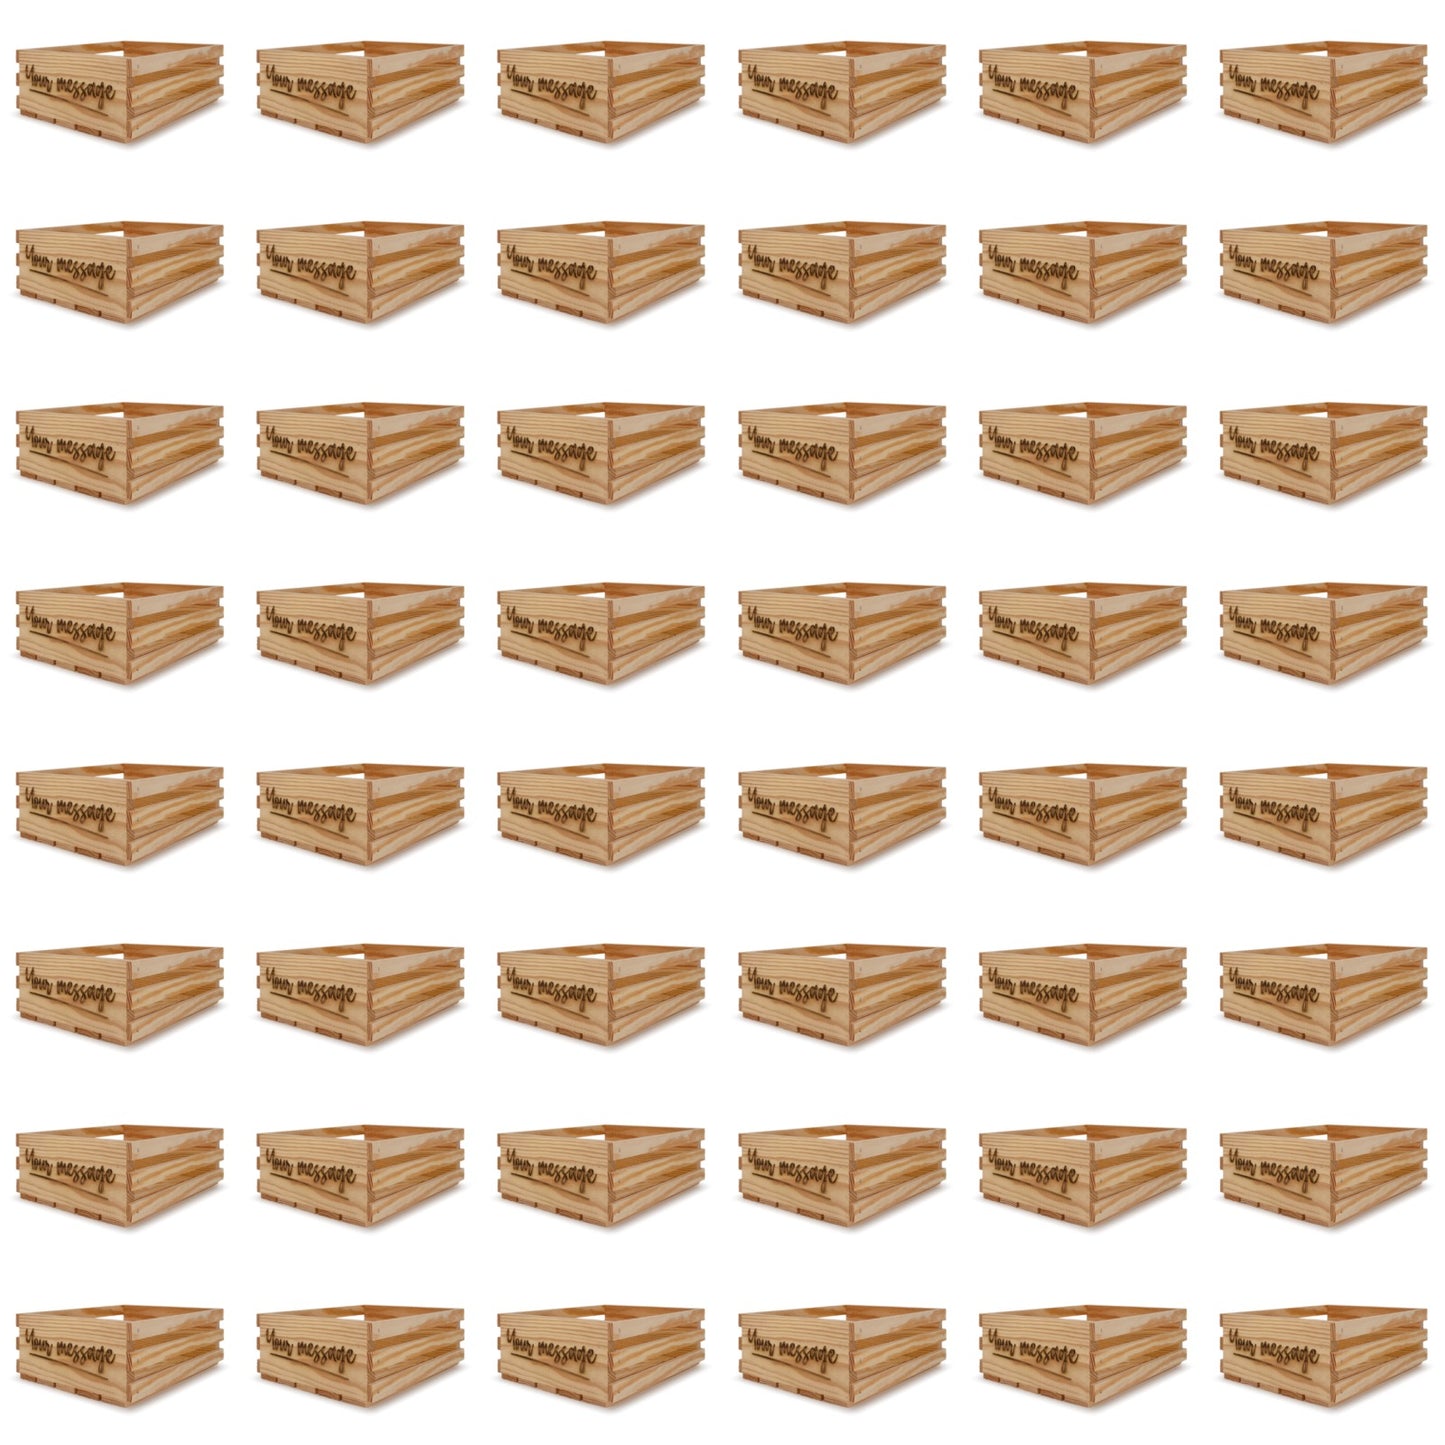 48 Small wooden crates 12x10x4.5 your message included